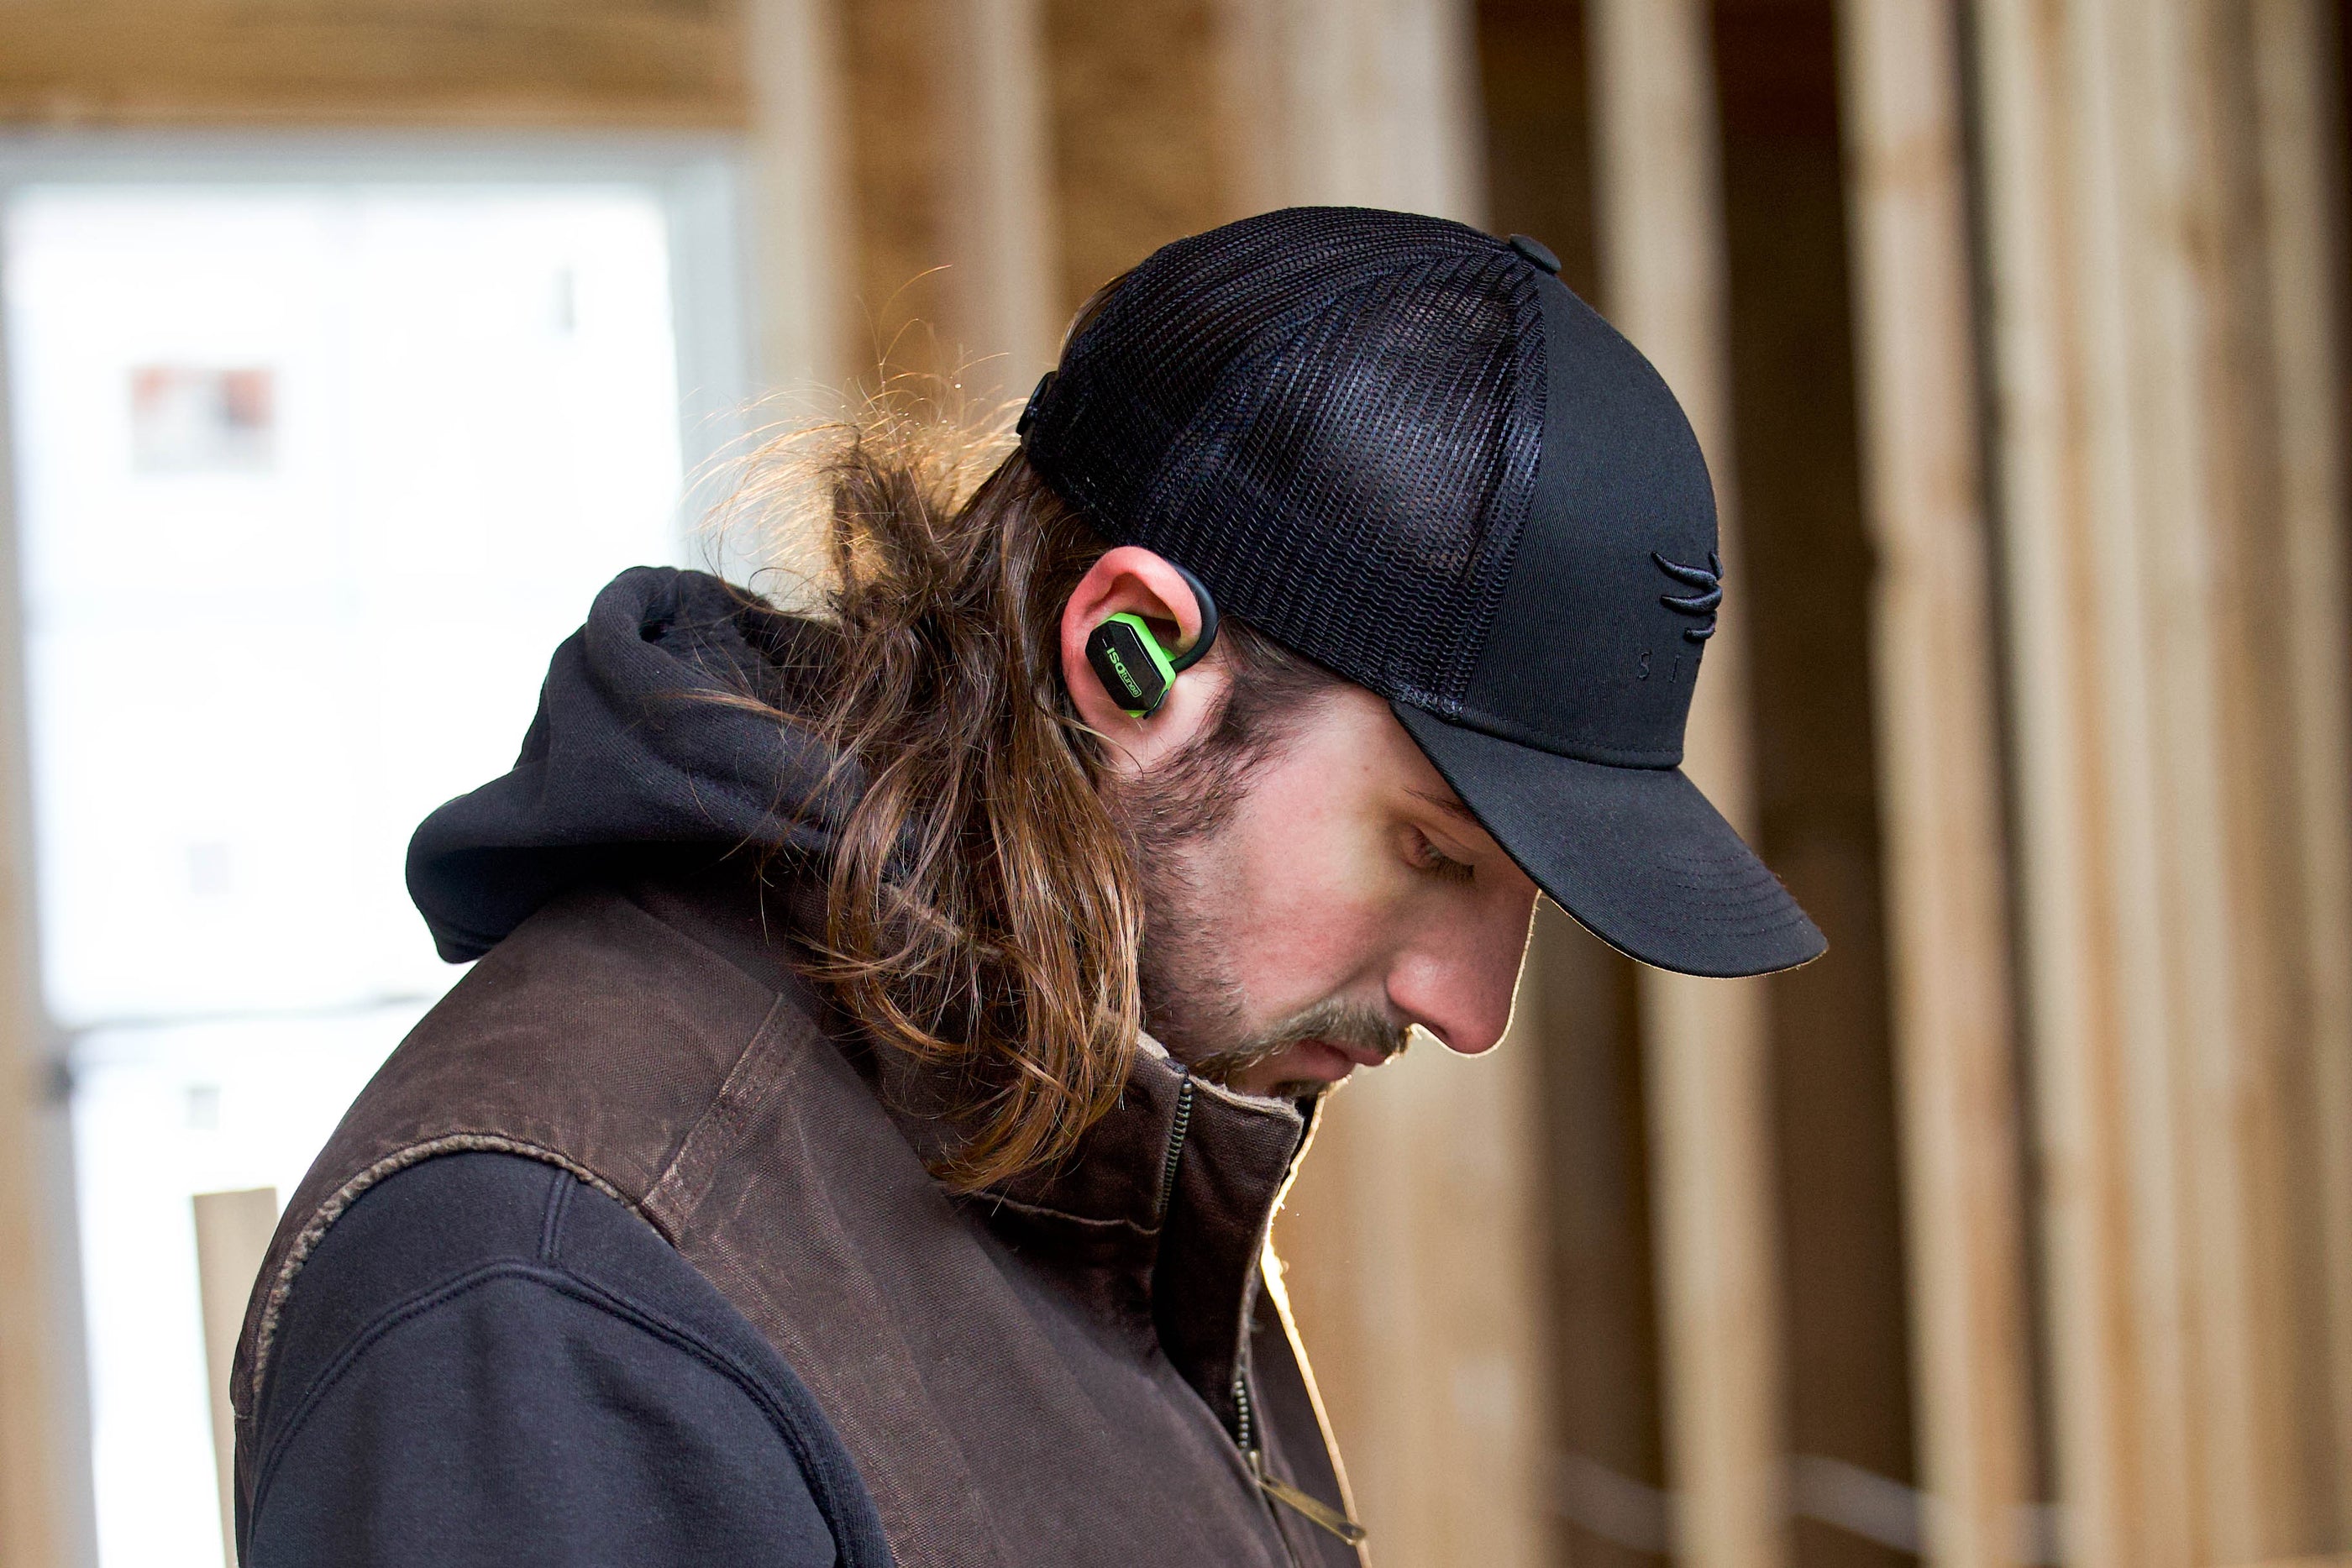 ISOtunes Hearing Protection ULTRACOMM Aware for Professionals in Loud Environments